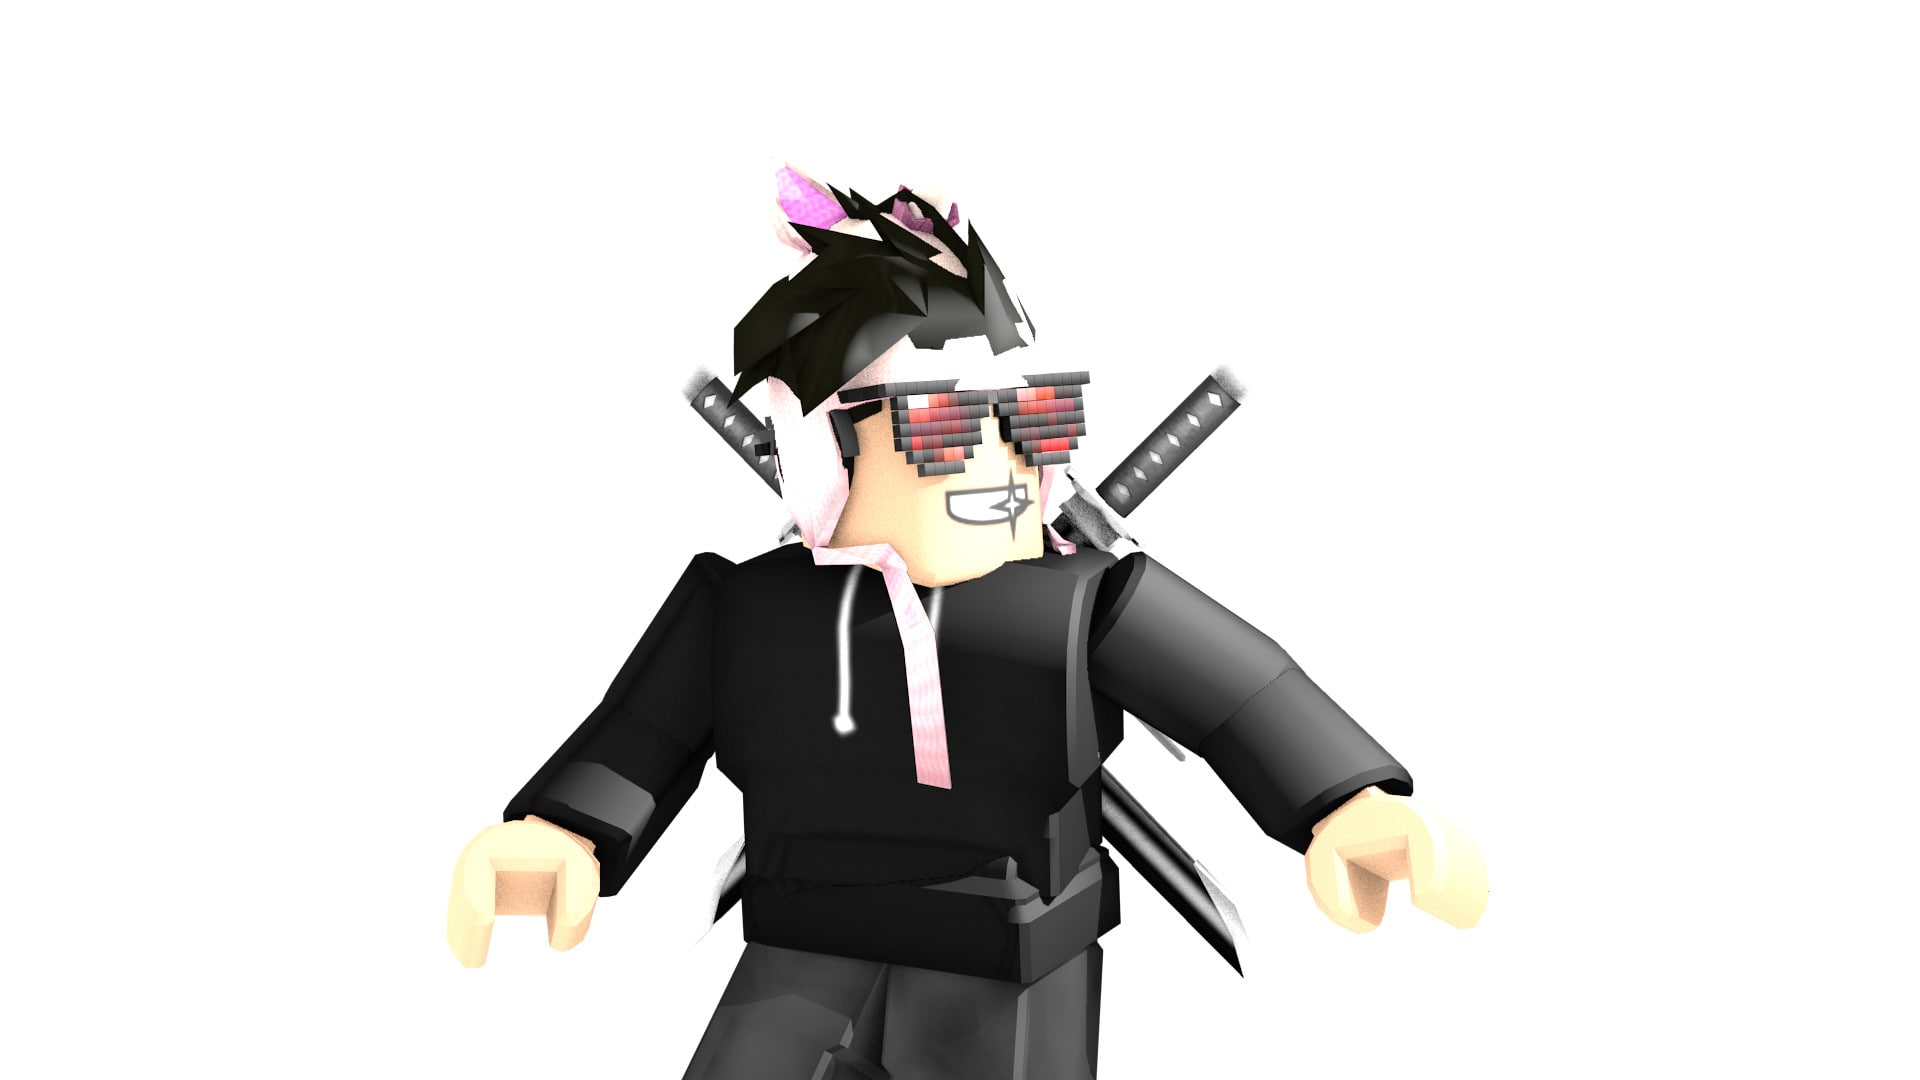 Make You A Roblox Render From Blender By Leeroo - ro gangster roblox wallpaper